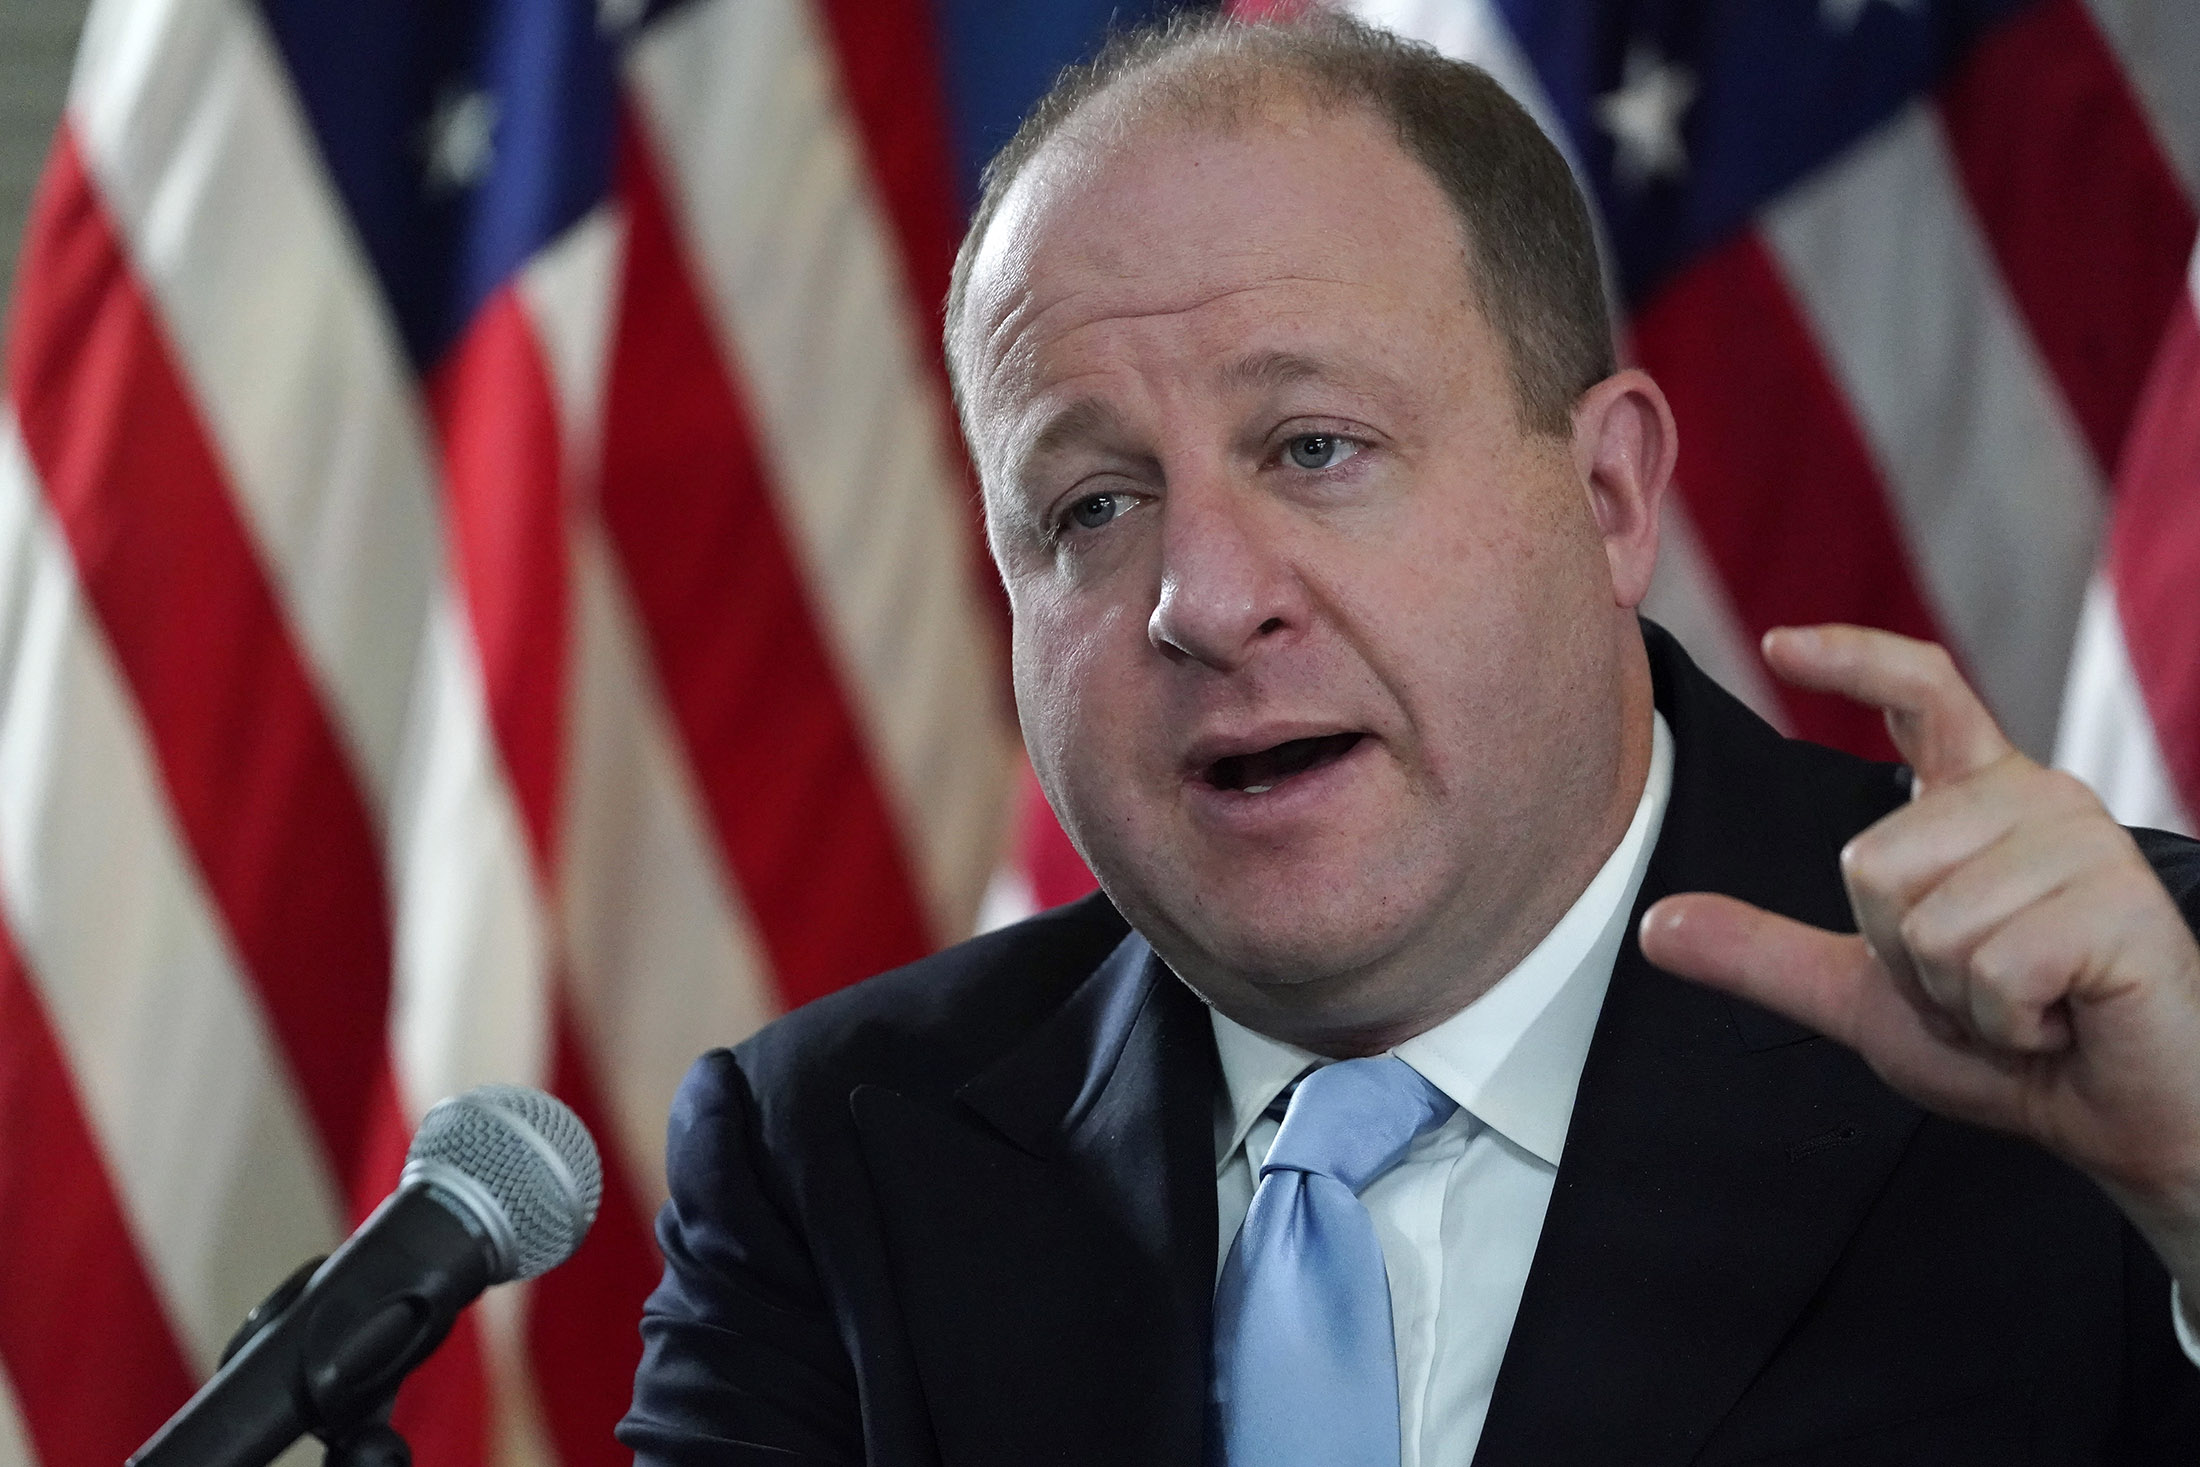 Colorado Gov. Jared Polis speaks during a news conference about the state's response to the rapid increase in Covid-19 cases, on Tuesday, November 24, in Denver. 